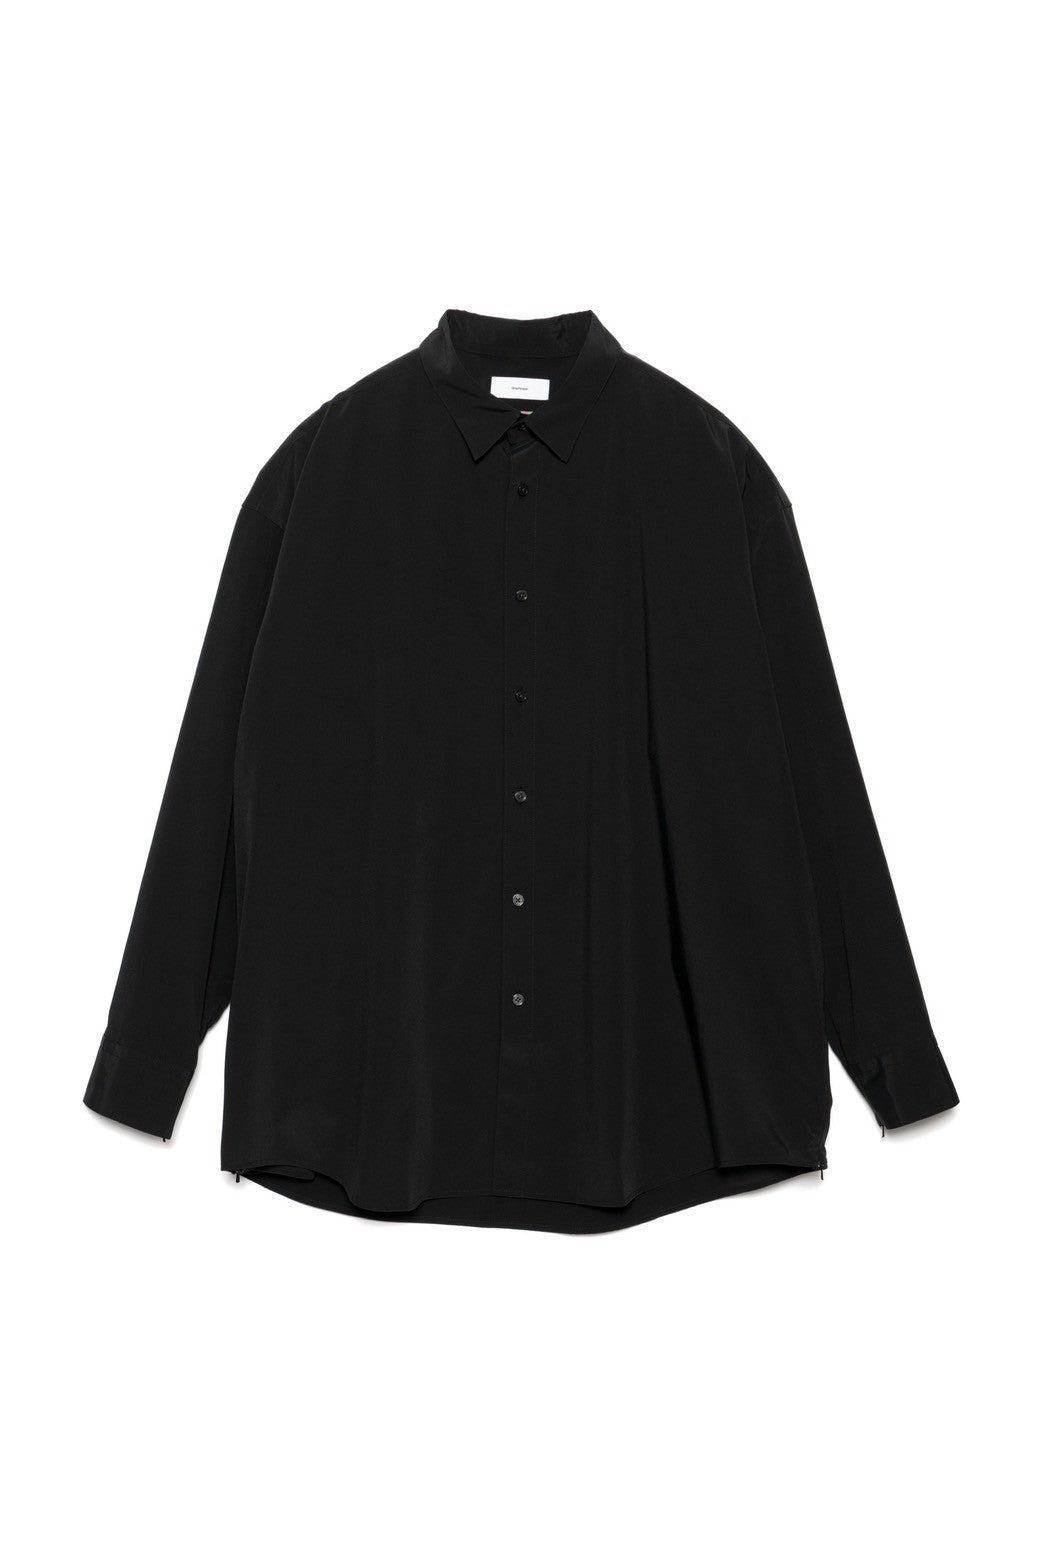 is-ness for Graphpaper 'Ventilation Long Sleeve Shirt'